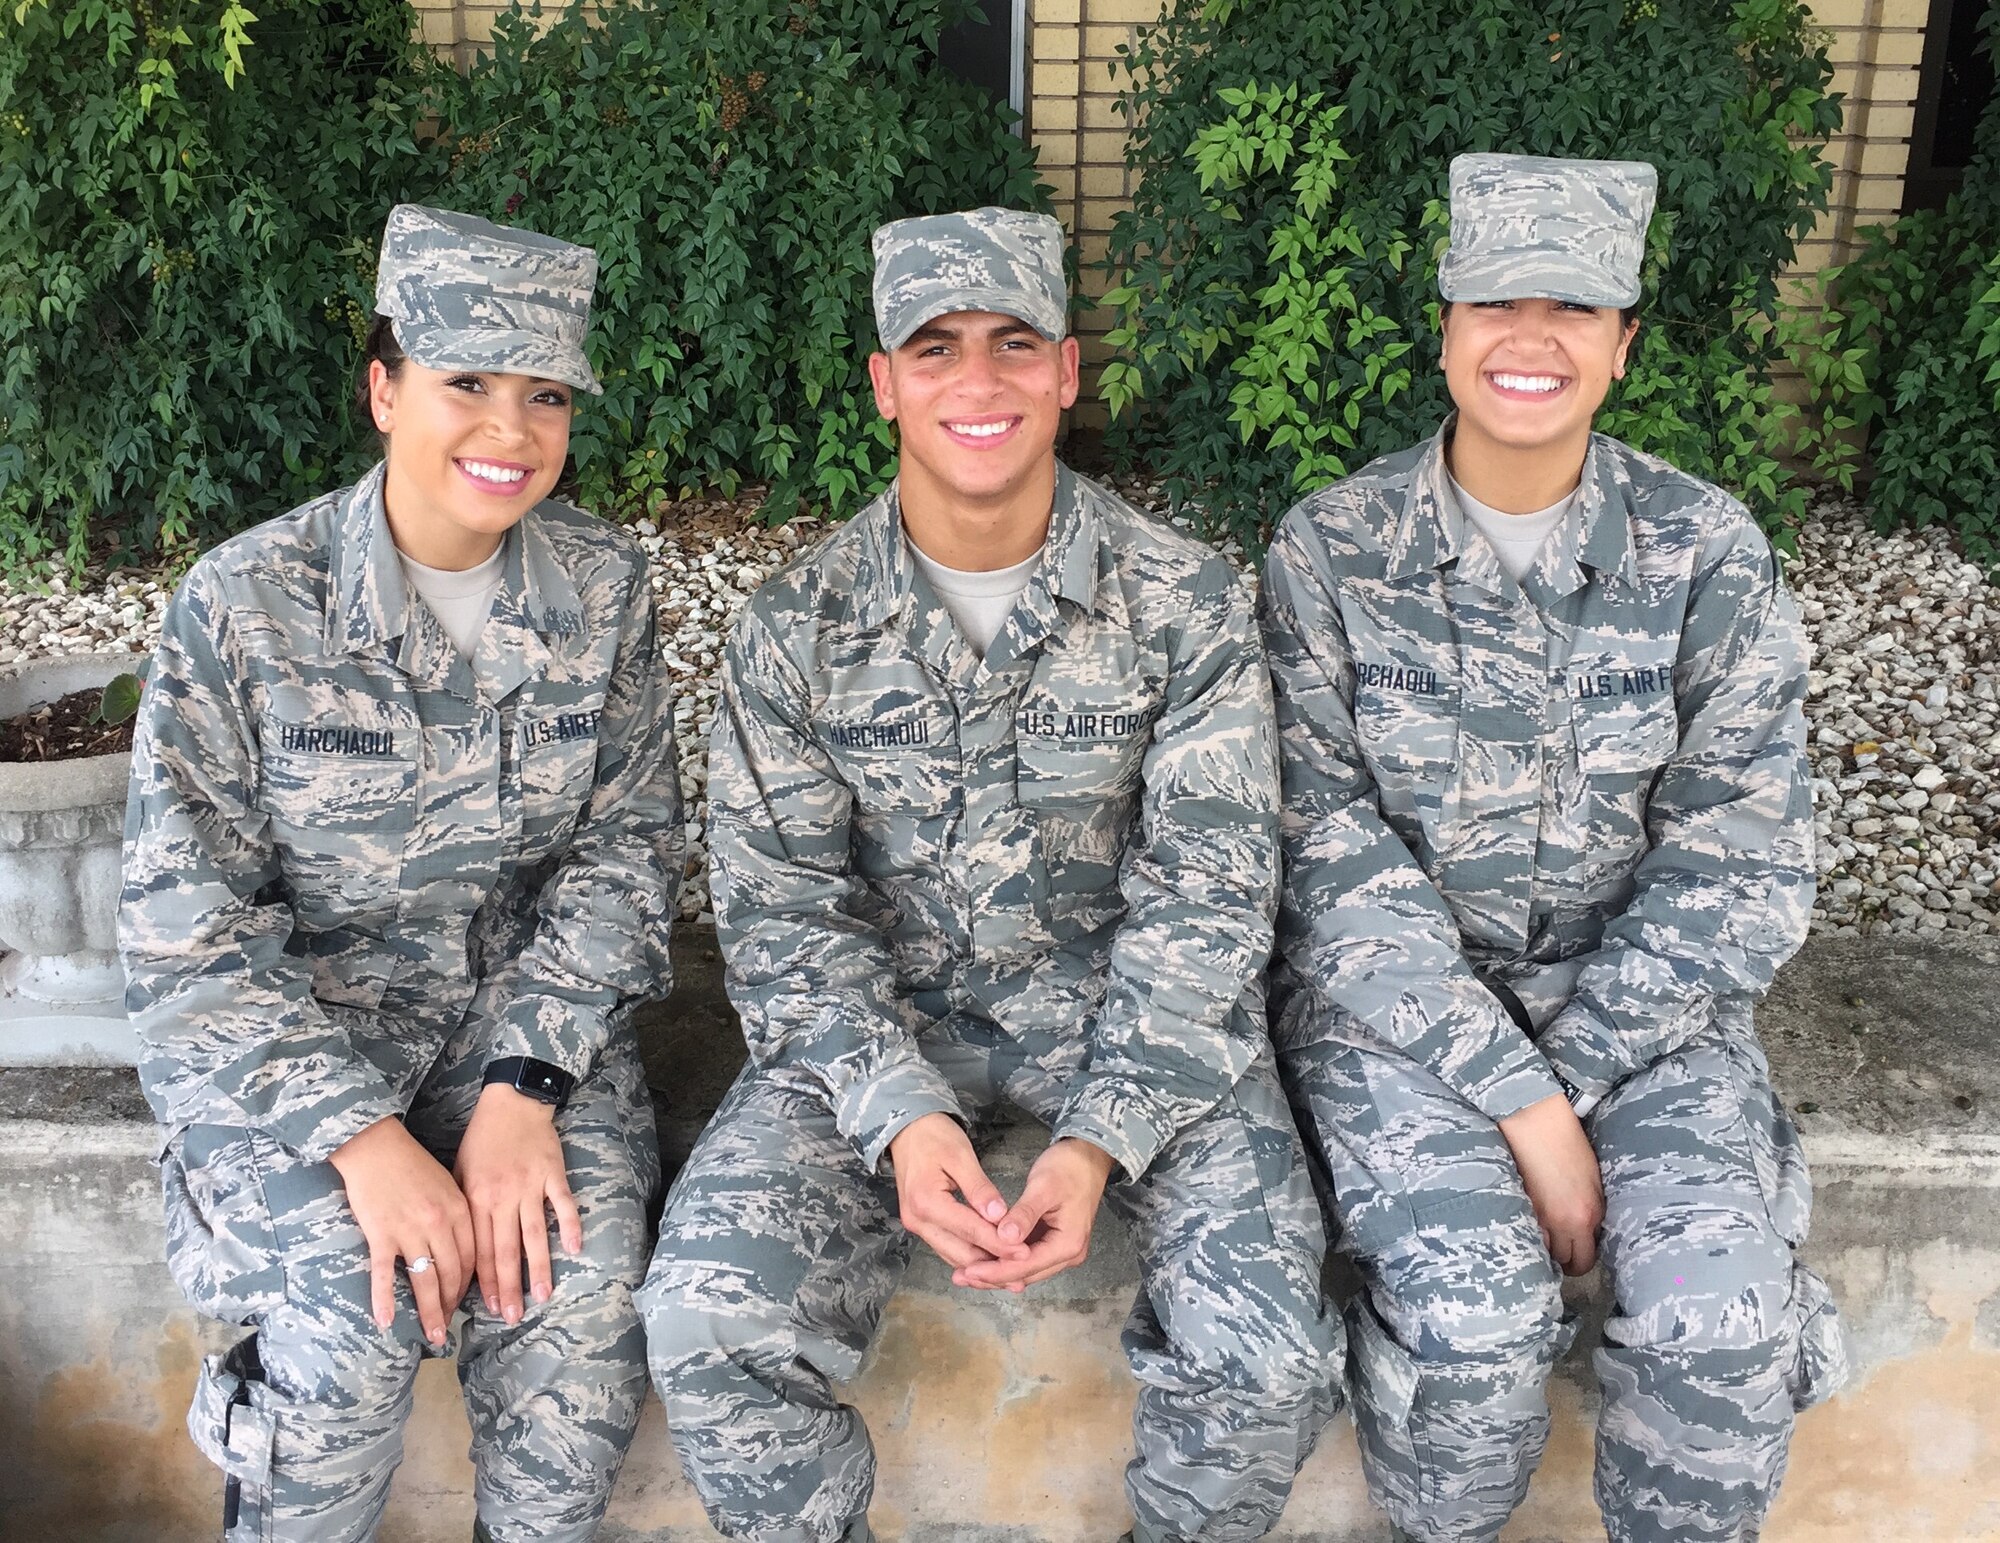 Pictured are the Harchaoui triplets (from left): Myriam, 436th Supply Chain Operations Squadron at Scott AFB; Rabah, 56th Security Forces Squadron at Luke AFB, Ariz.; and Warda, 60th Medical Operations Squadron at Travis AFB, Calif. All three were born in Algeria before immigrating to the United States, and are Airmen serving in today’s Air Force.